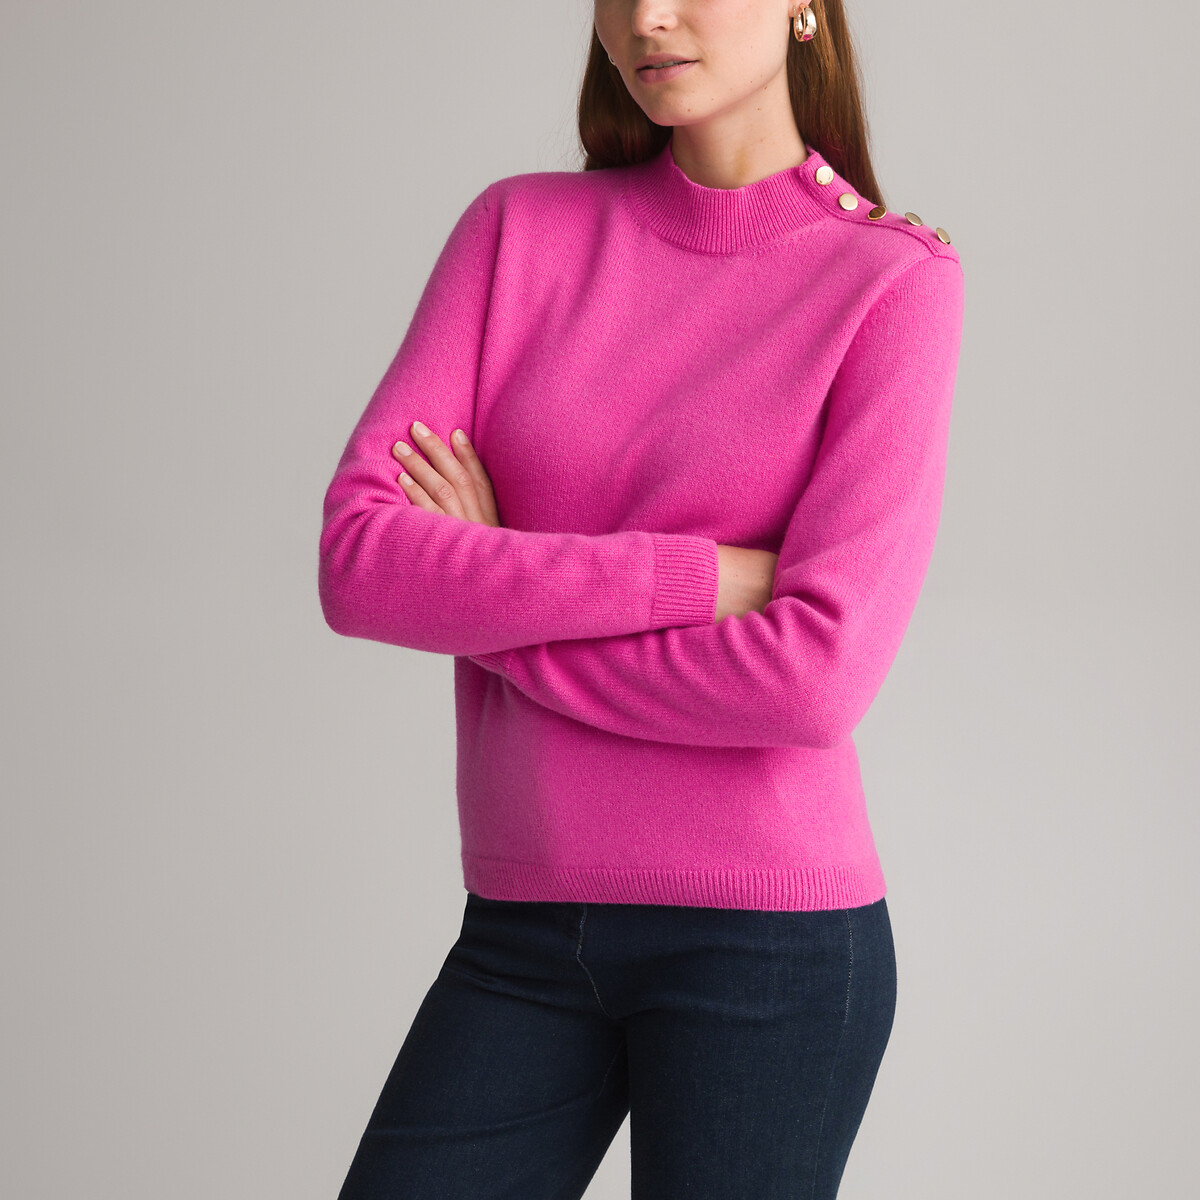 Wool/Cashmere Jumper in Fine Knit with High Neck